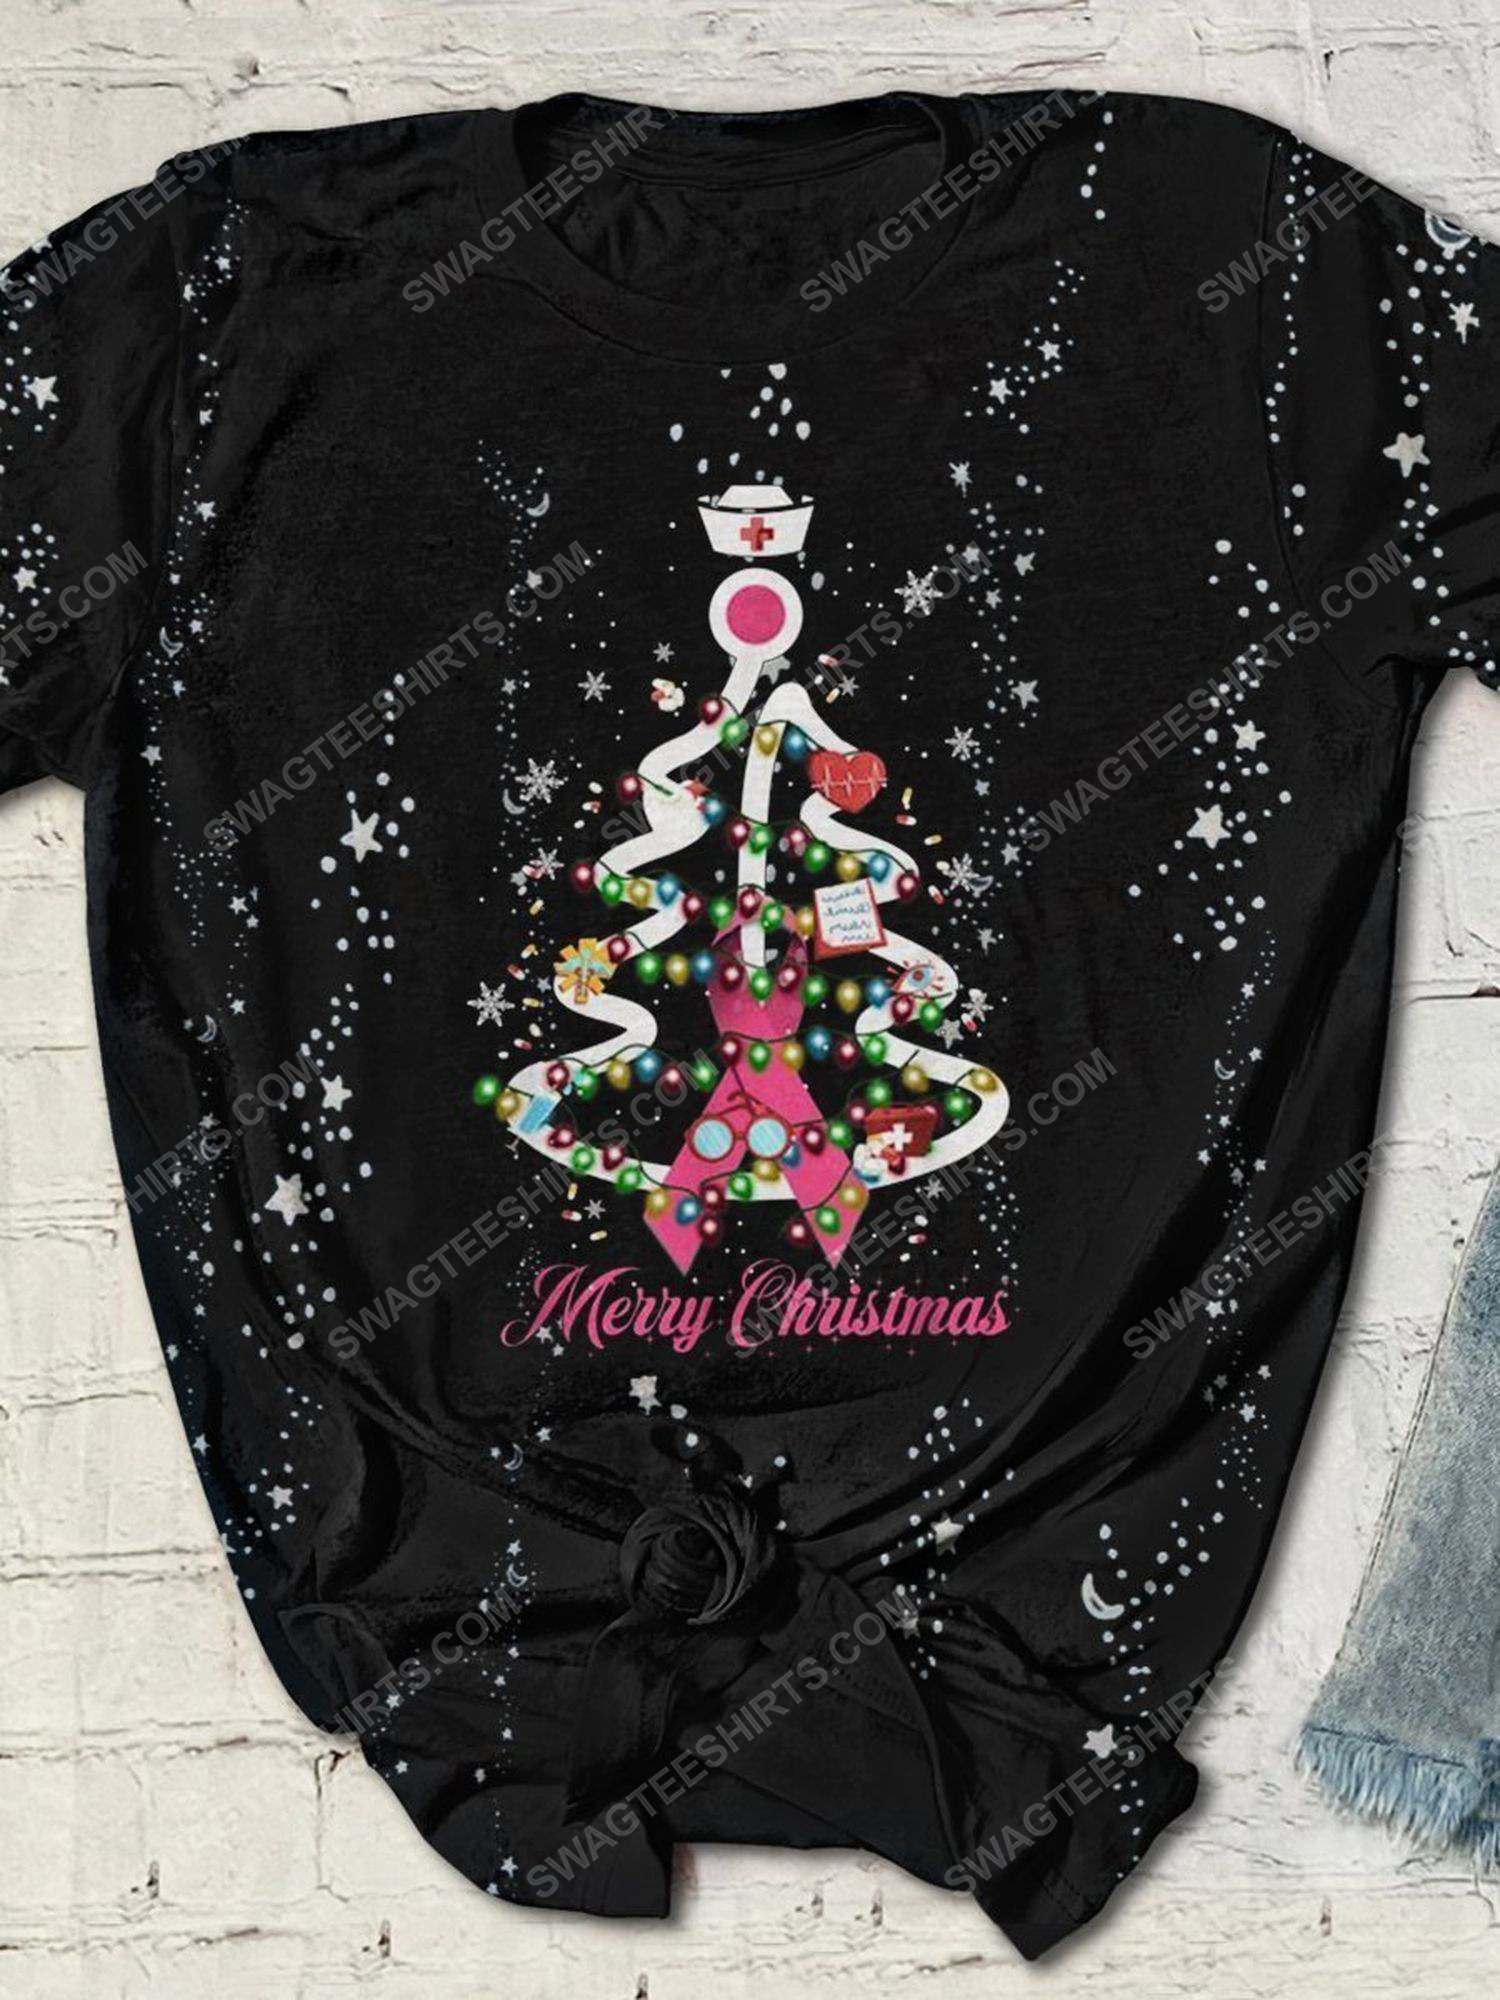 [special edition] Breast cancer awareness merry christmas tree full print shirt – maria (cancer)